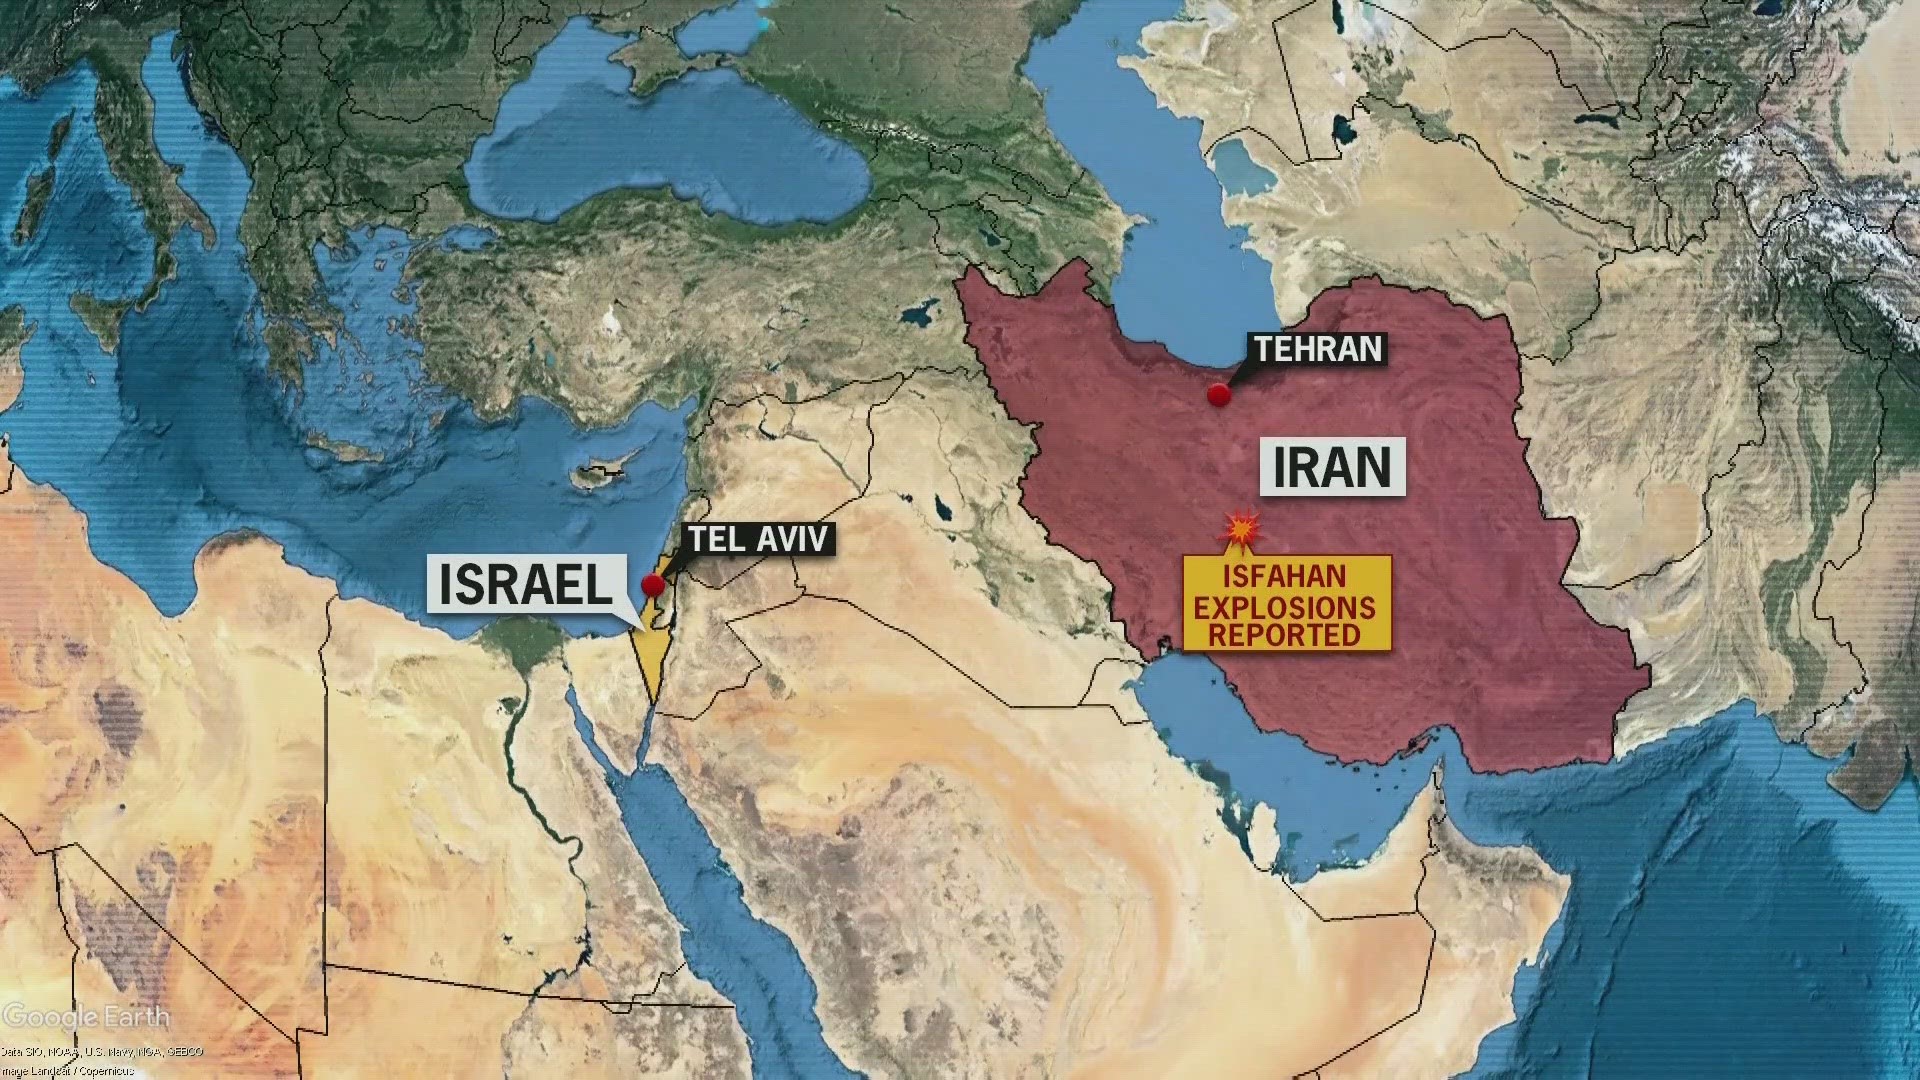 The apparent assault comes in retaliation for Tehran's unprecedented drone-and-missile assault on Israel.